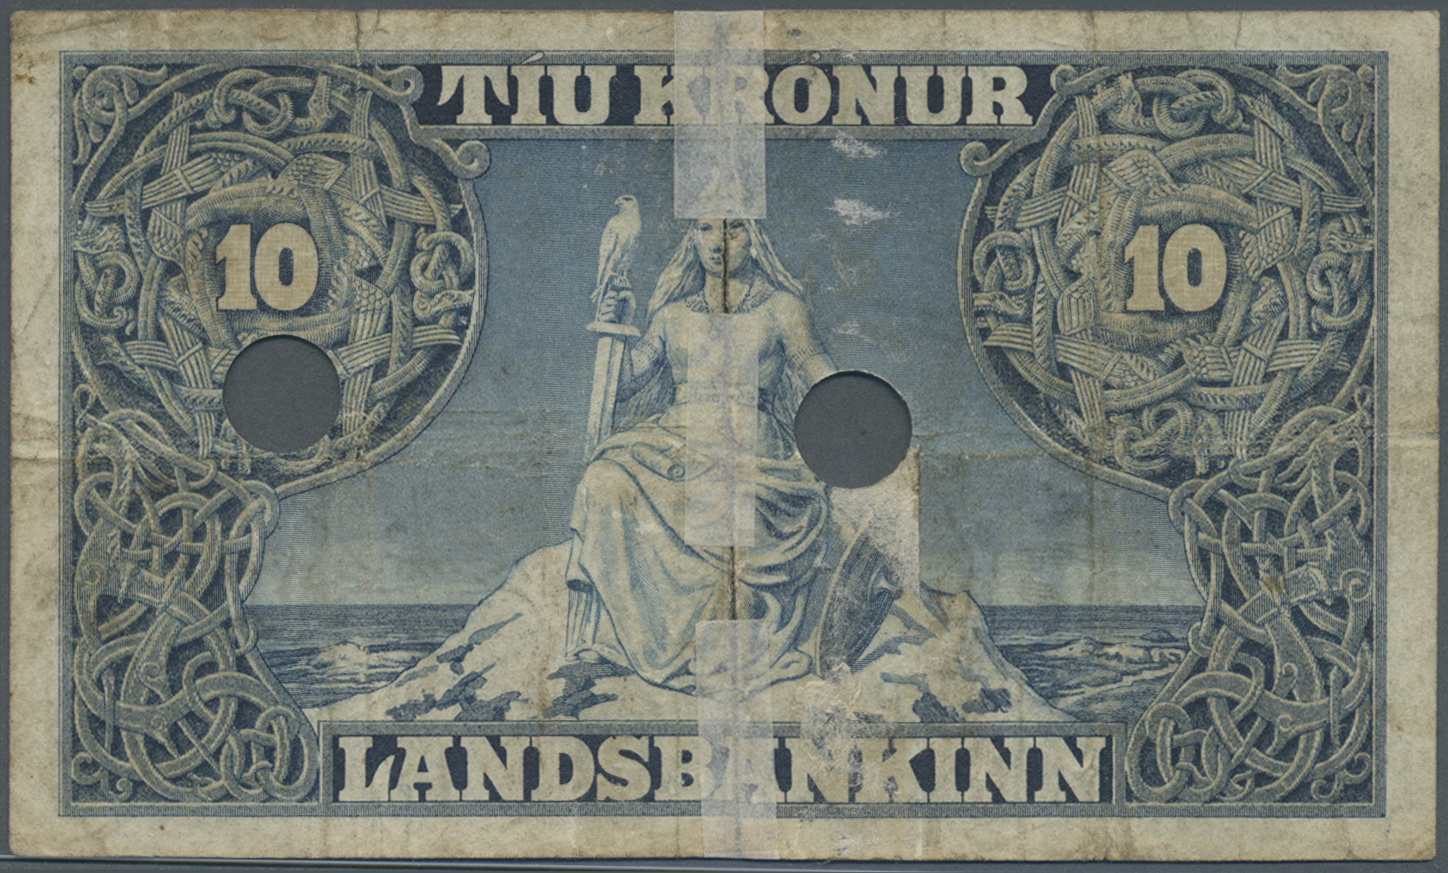 01020 Iceland / Island: 10 Kroner L.1885 (1900) P. 5b, Torn An Taped On Back Side, 2 Cancellation Holes, Stained Paper, - Islanda